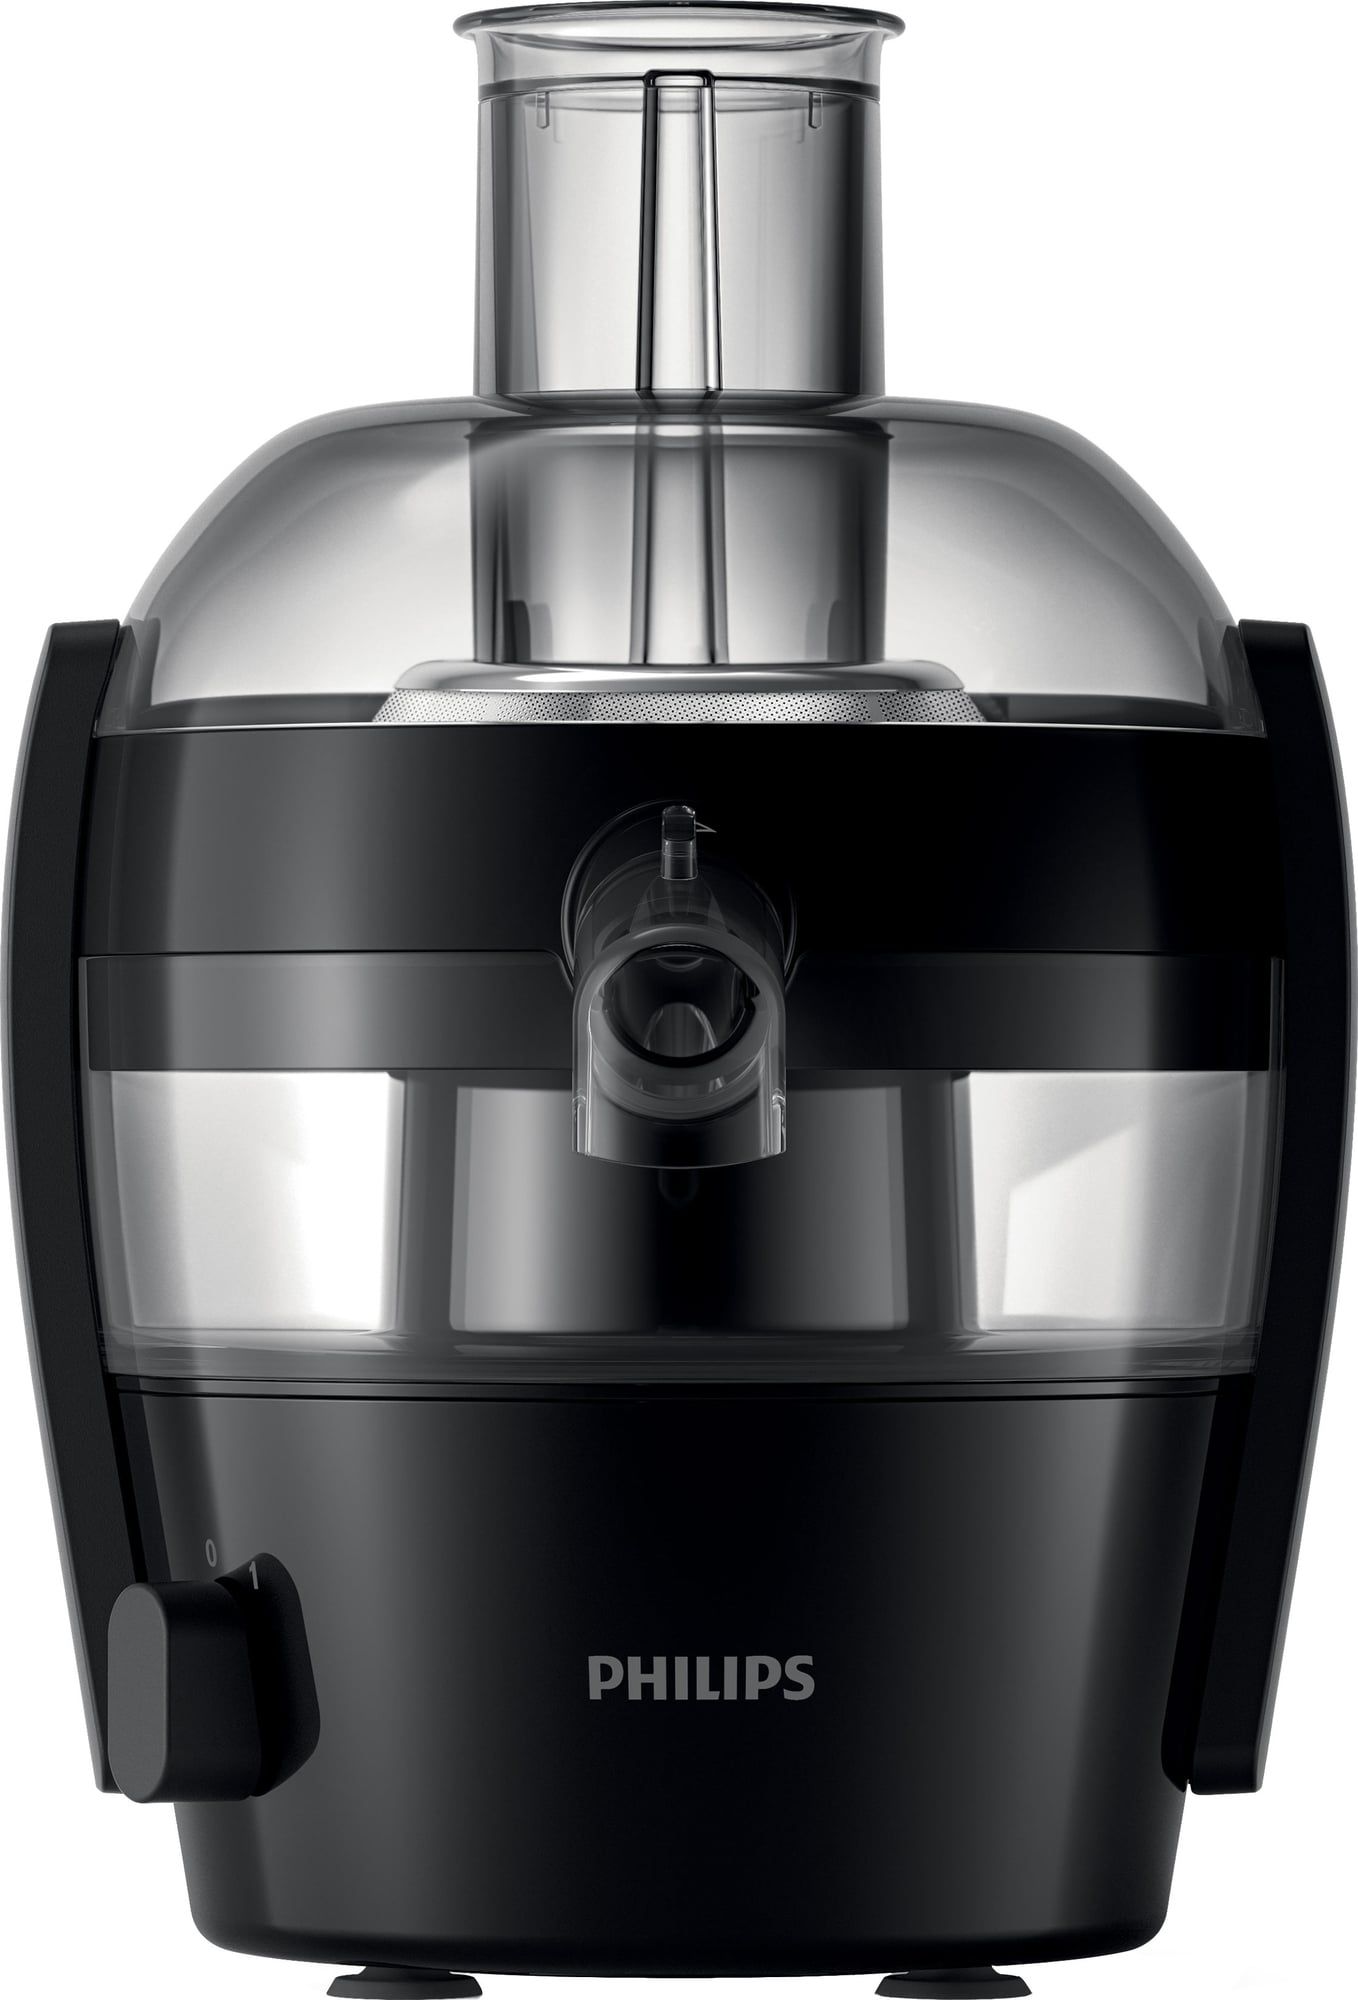 Philips Viva Collection Juicer HR183200 thumbnail